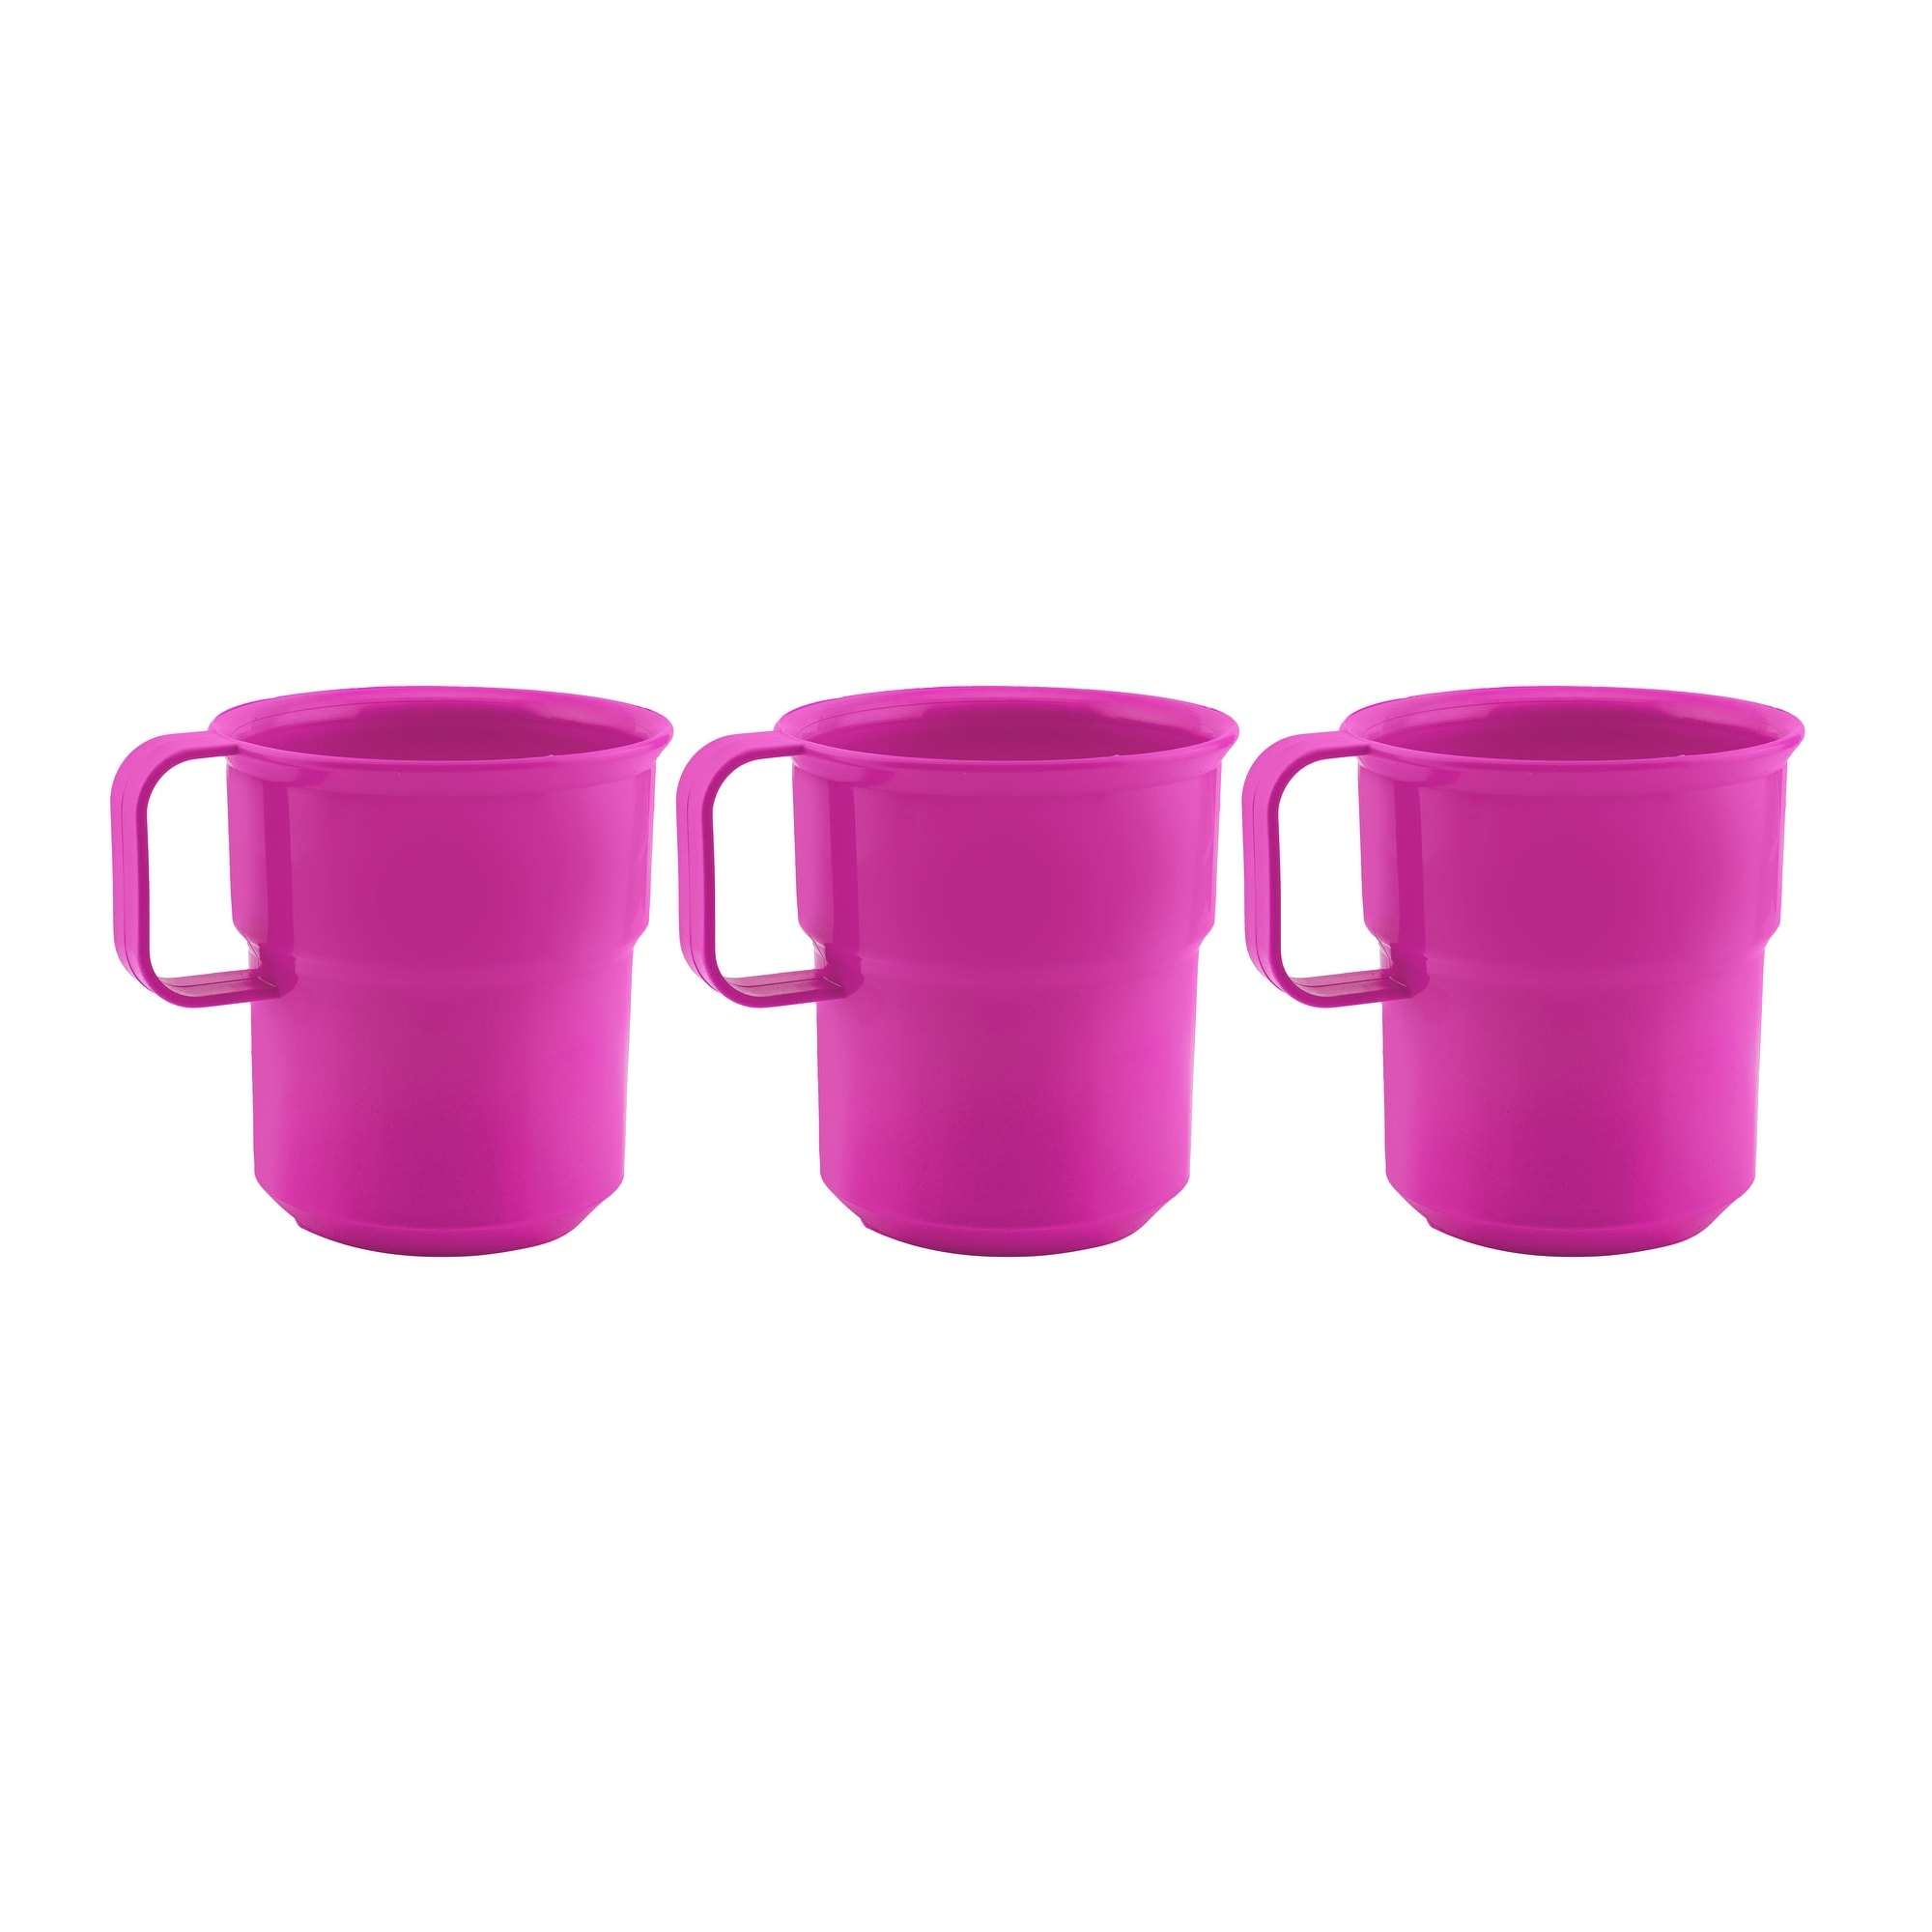 https://ak1.ostkcdn.com/images/products/is/images/direct/728f756ceced4ae809db2f5e196510b505cf46a8/Break-Resistant-Plastic-Cup-Mugs-for-Coffee%2C-Juice---8oz-Pack-of-3.jpg